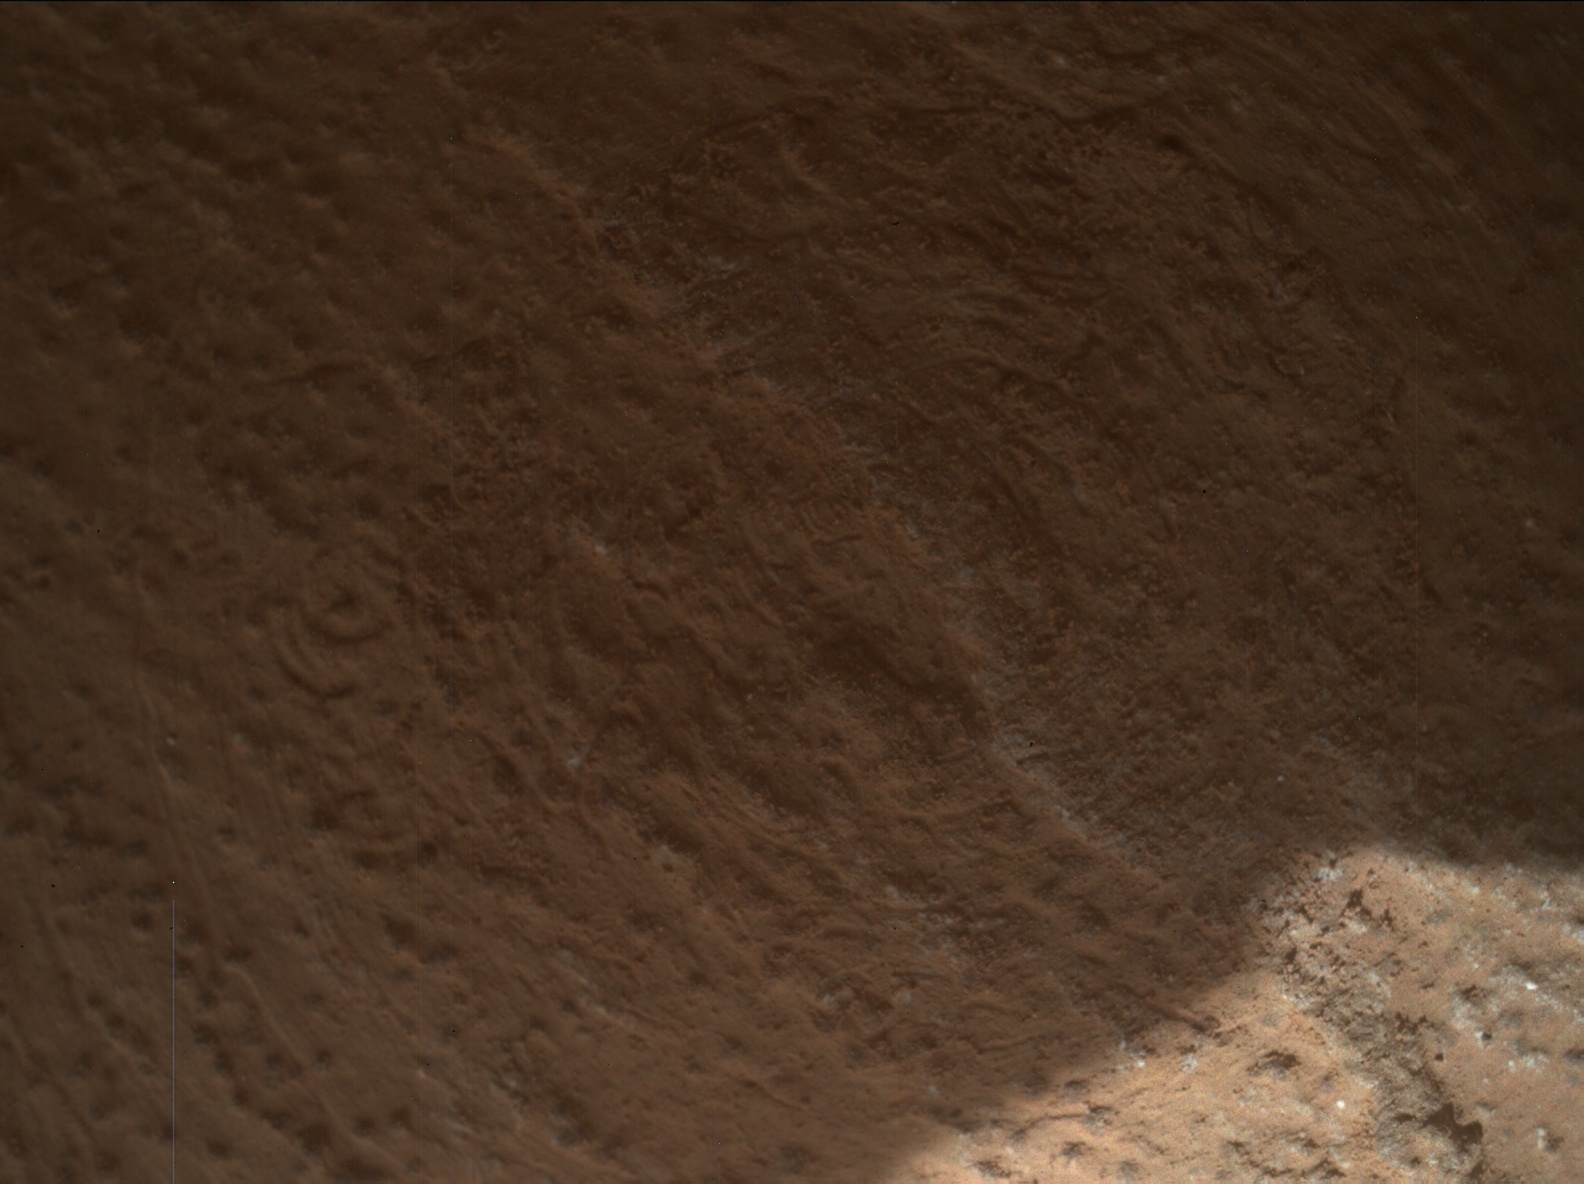 Nasa's Mars rover Curiosity acquired this image using its Mars Hand Lens Imager (MAHLI) on Sol 3287